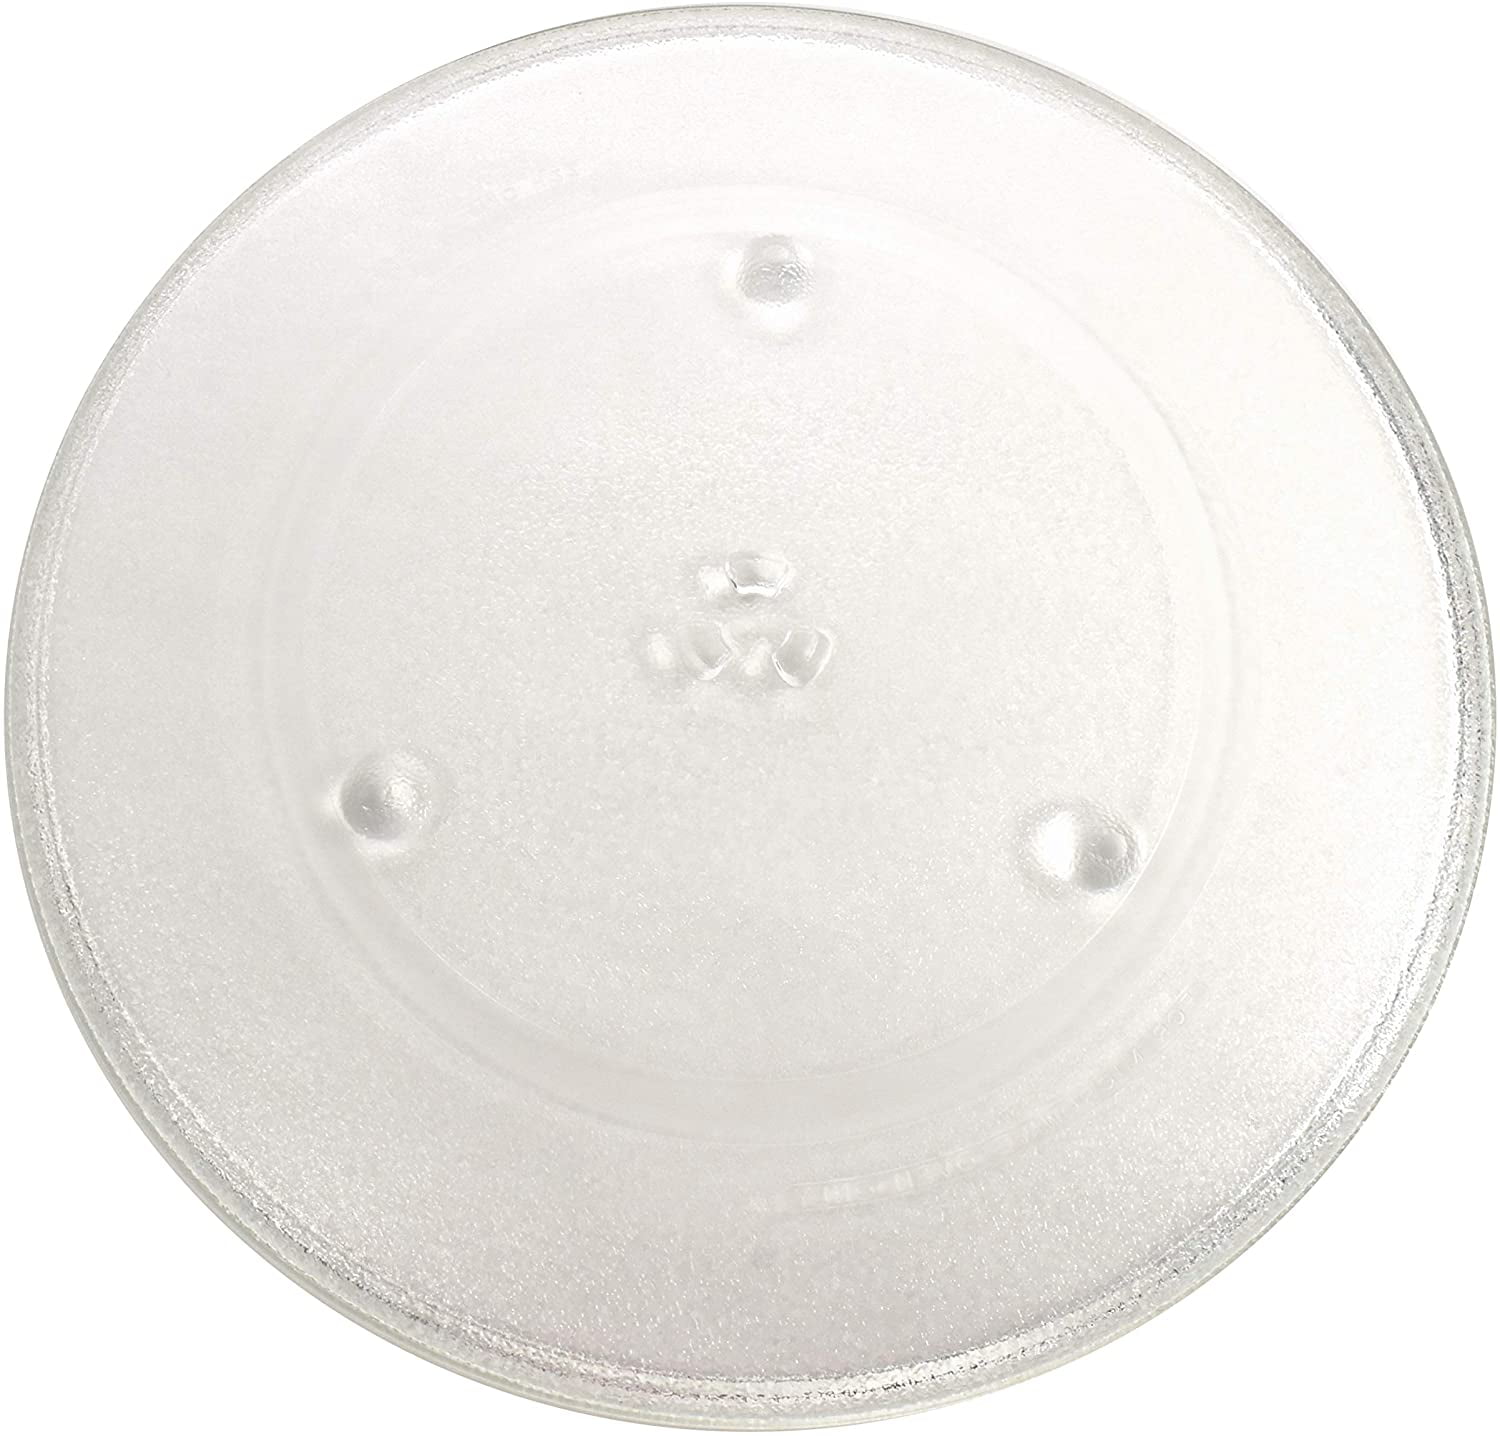 Tray 11 1/4 " WB49X10097 G.E Microwave Glass Turntable Plate 